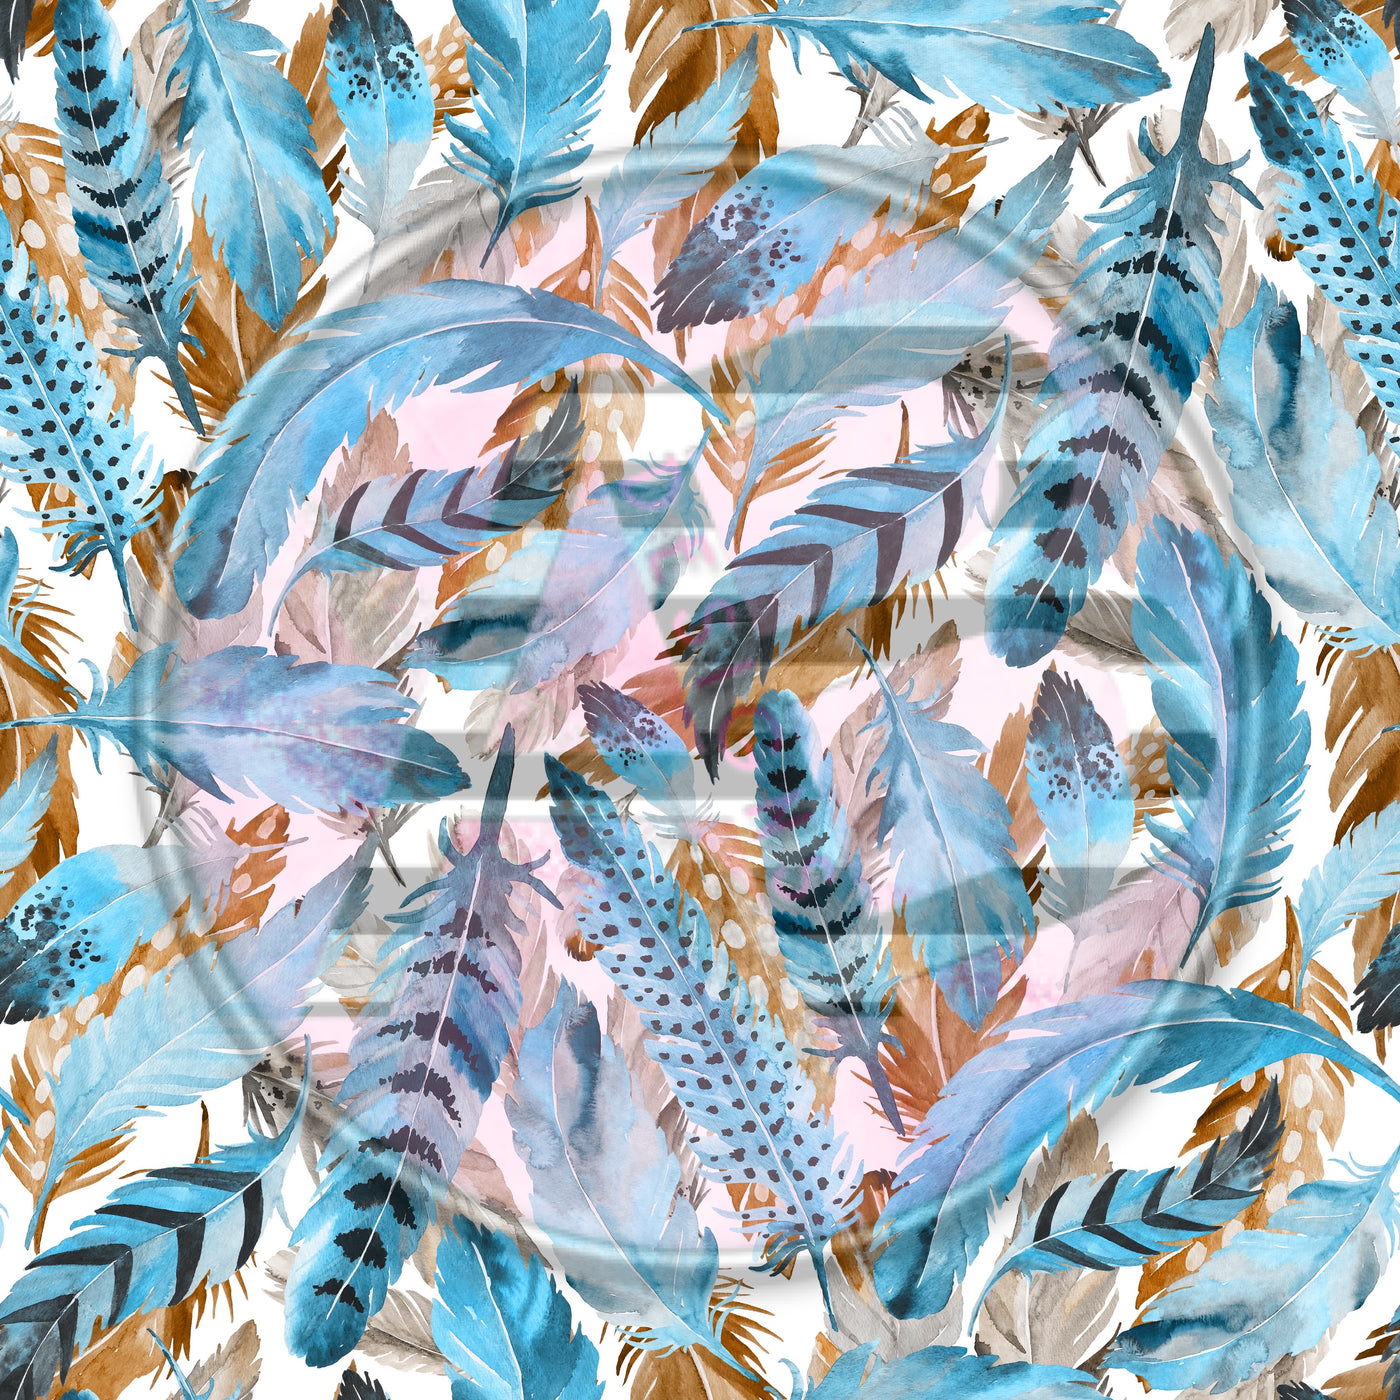 Adhesive Patterned Vinyl - Feathers 272